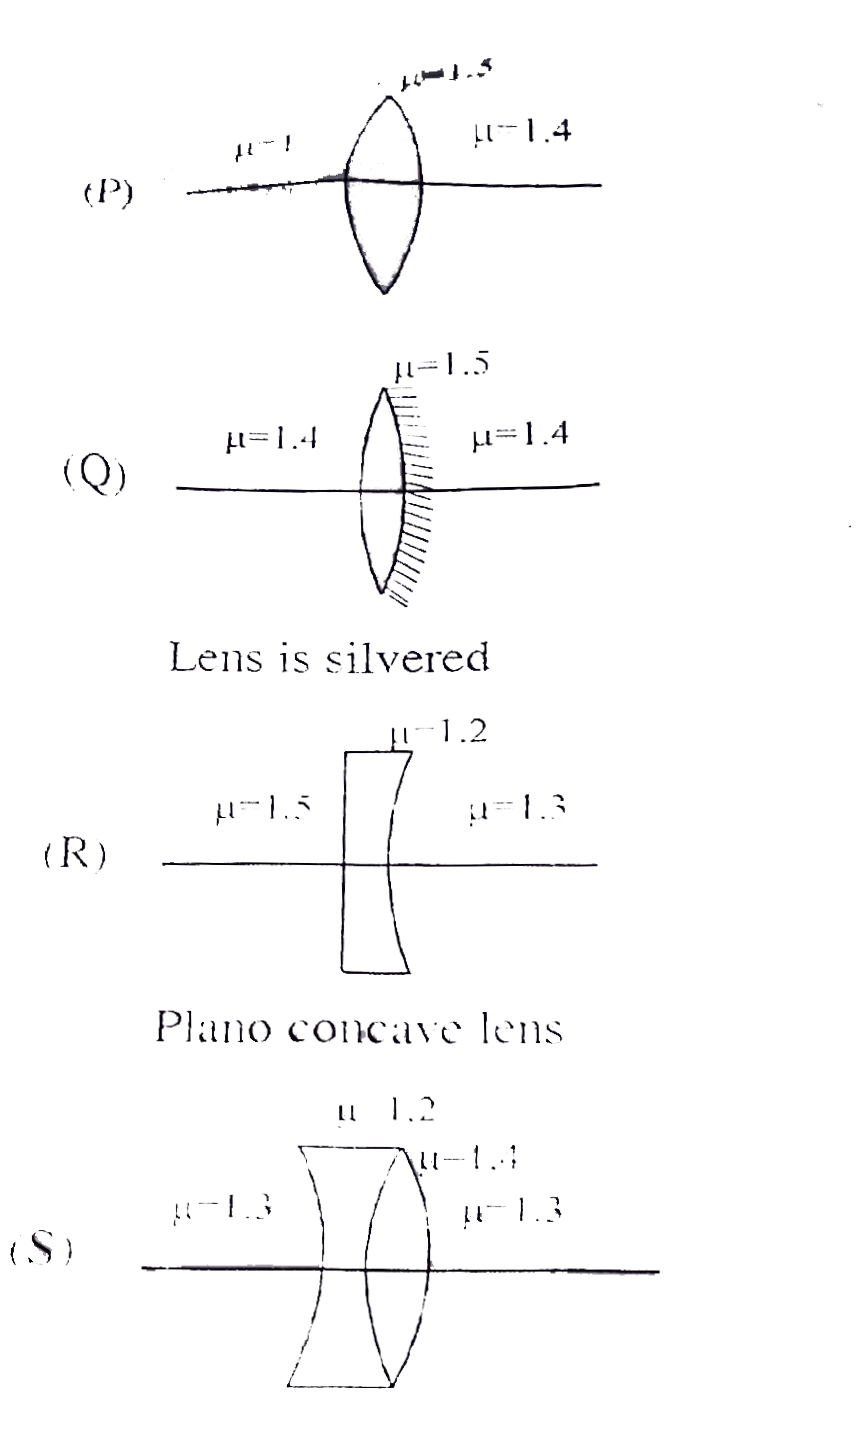 List-I gives different lens configurations. The radius of curvature of each surface is R. Rays of light parallel to the axis of lens from left of lens traversing through the lens get focused at distance f from the lens. List-II gives corresponding values of magnitudes of f (mu represent refractive index):-